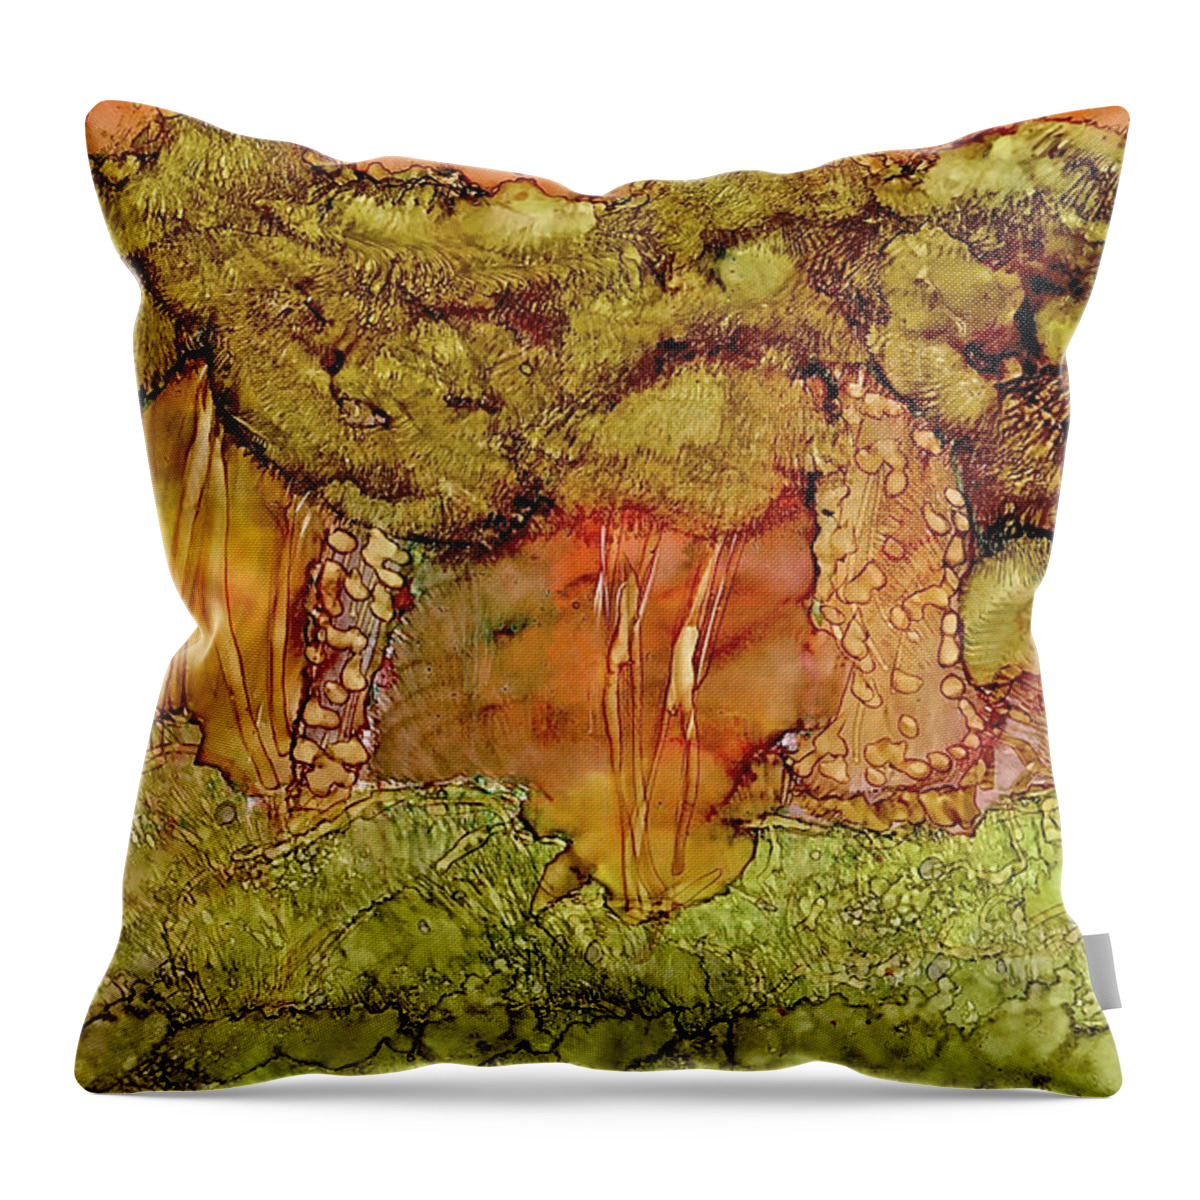 Sunset In The Forest Throw Pillow featuring the painting Sunset In The Forest by Bellesouth Studio